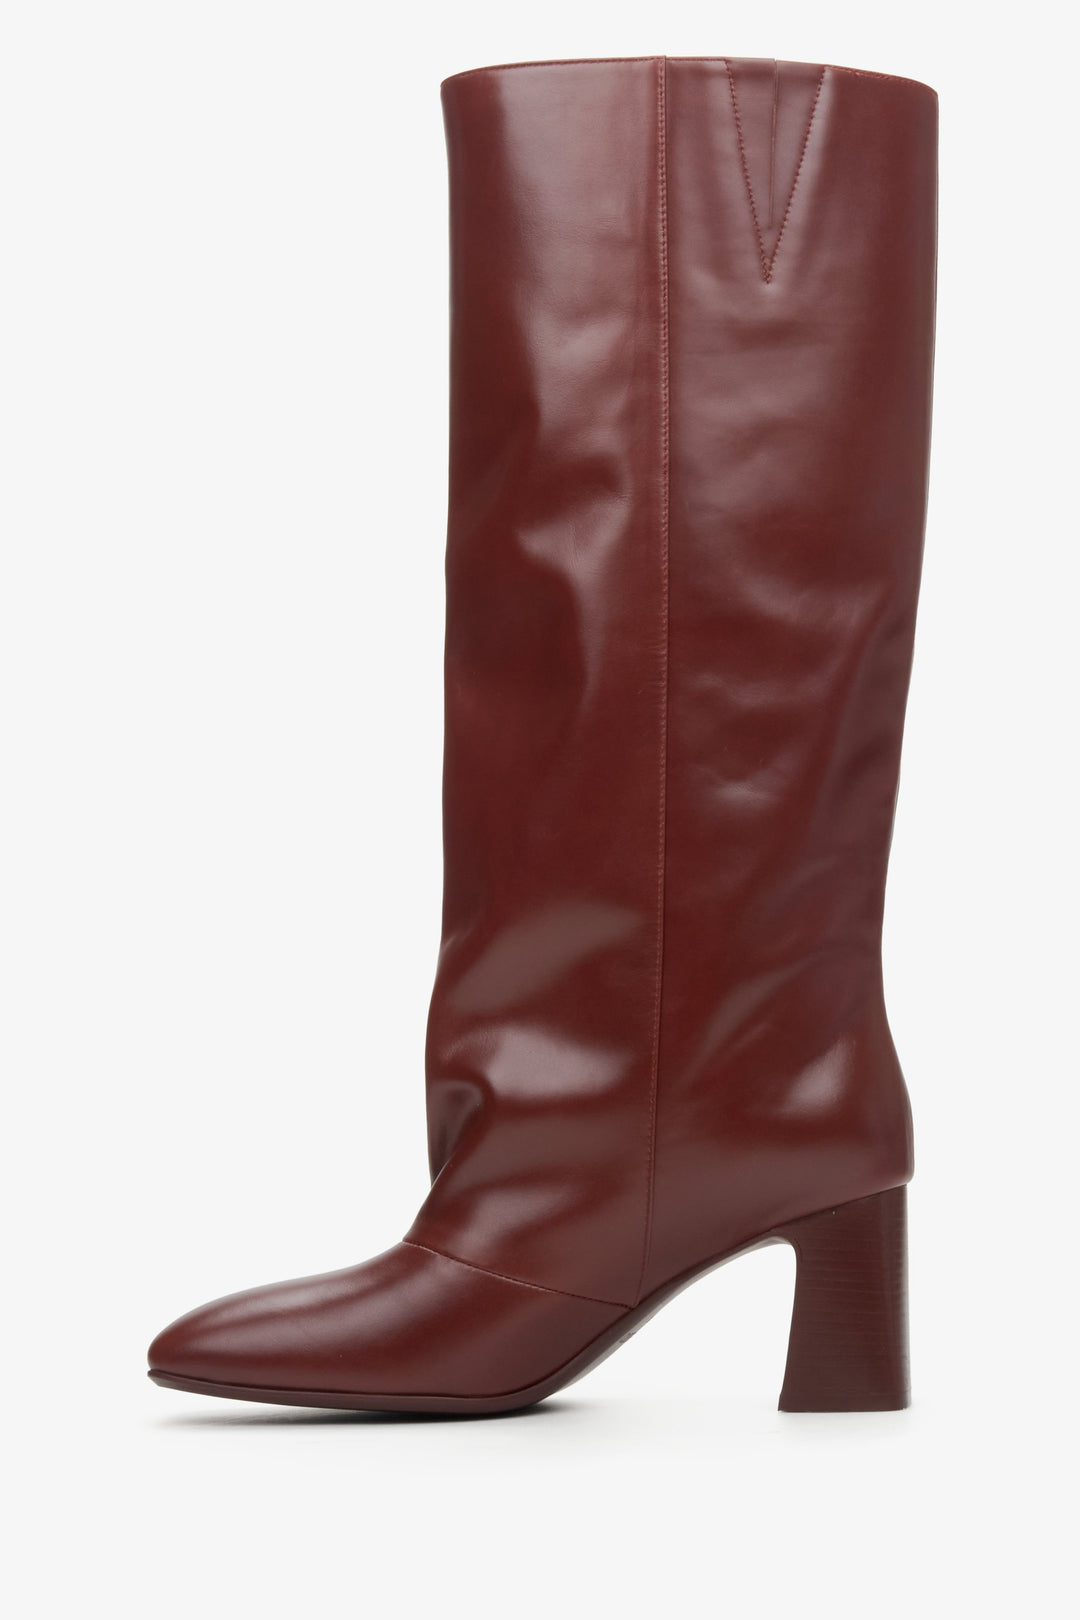 Burgundy leather high boots made of patent leather.